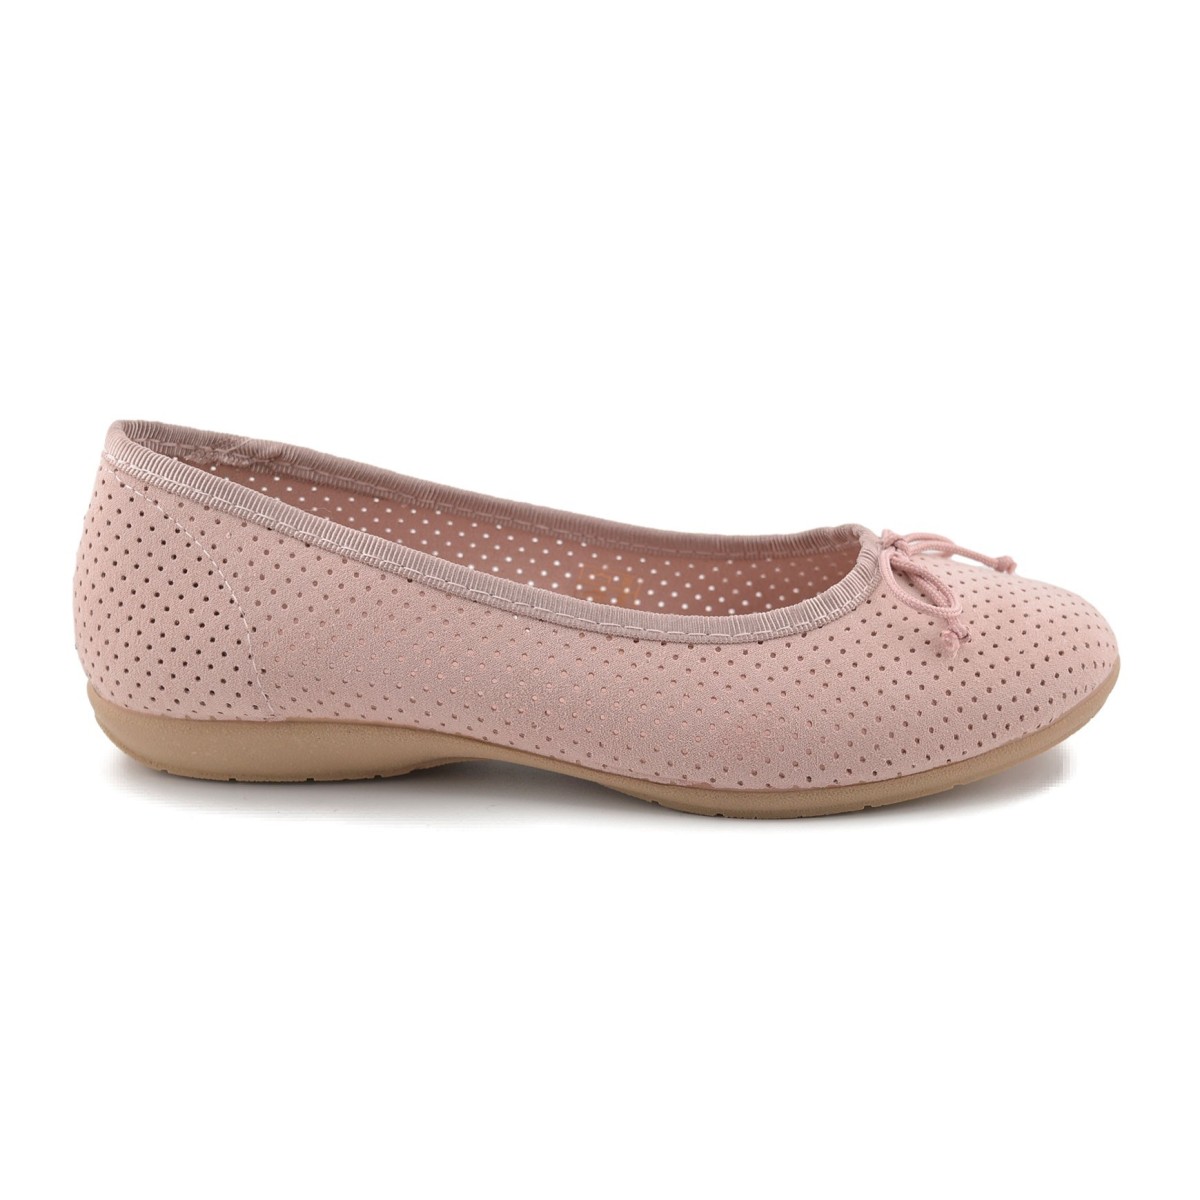 Pink casual ballerinas by Amelie